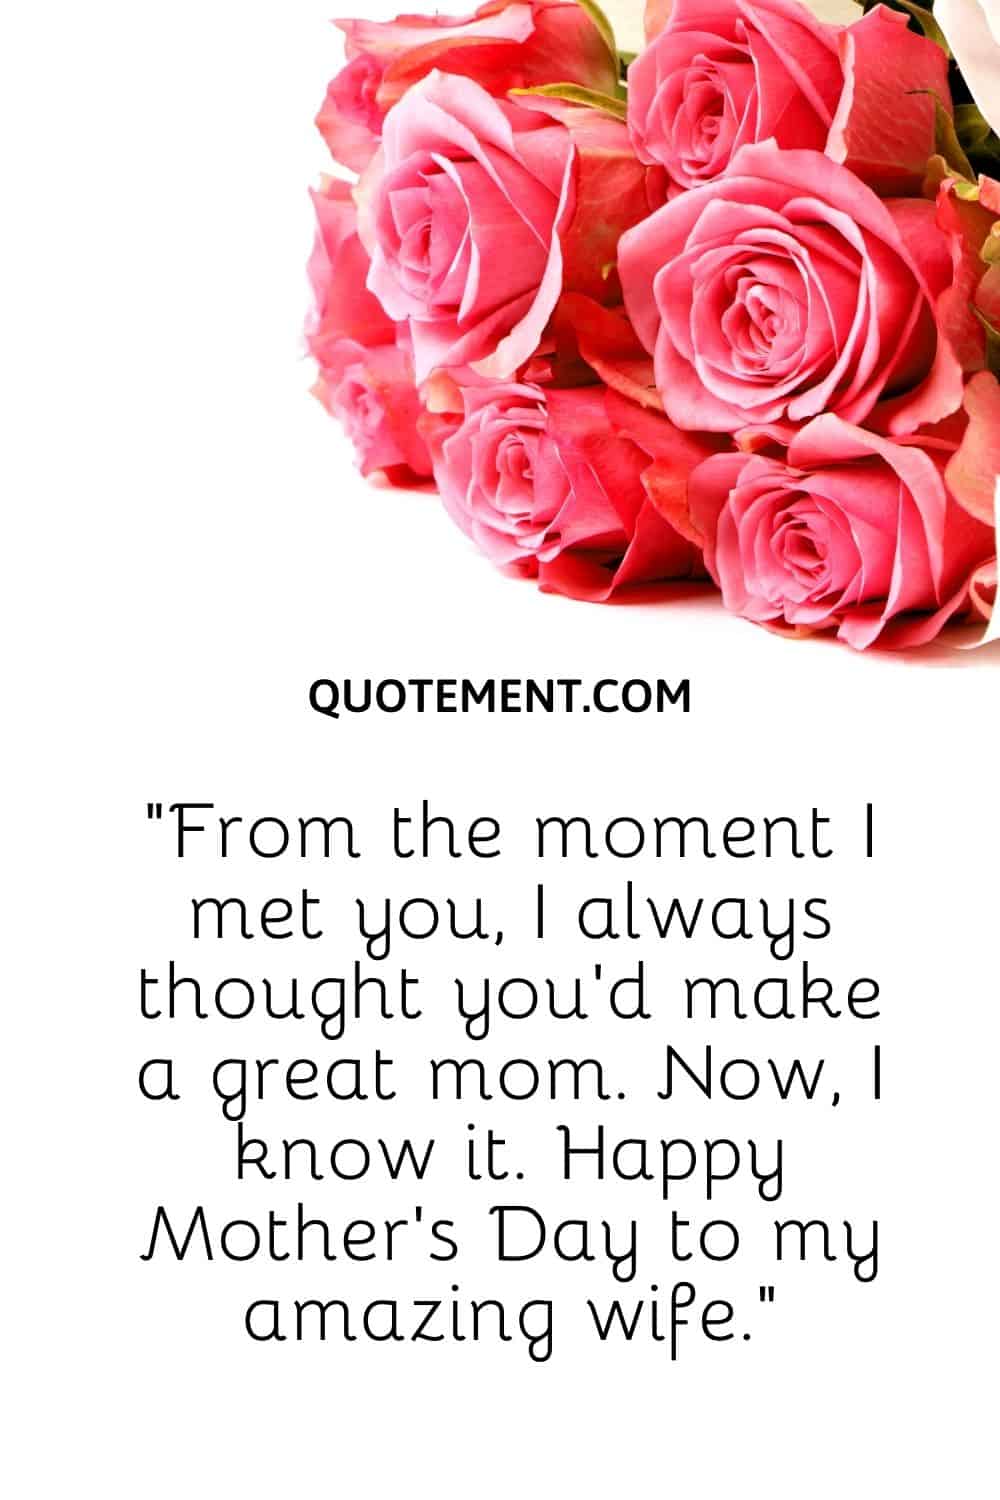 Top 90 Happy Mother's Day Quotes For Wife To Impress Her